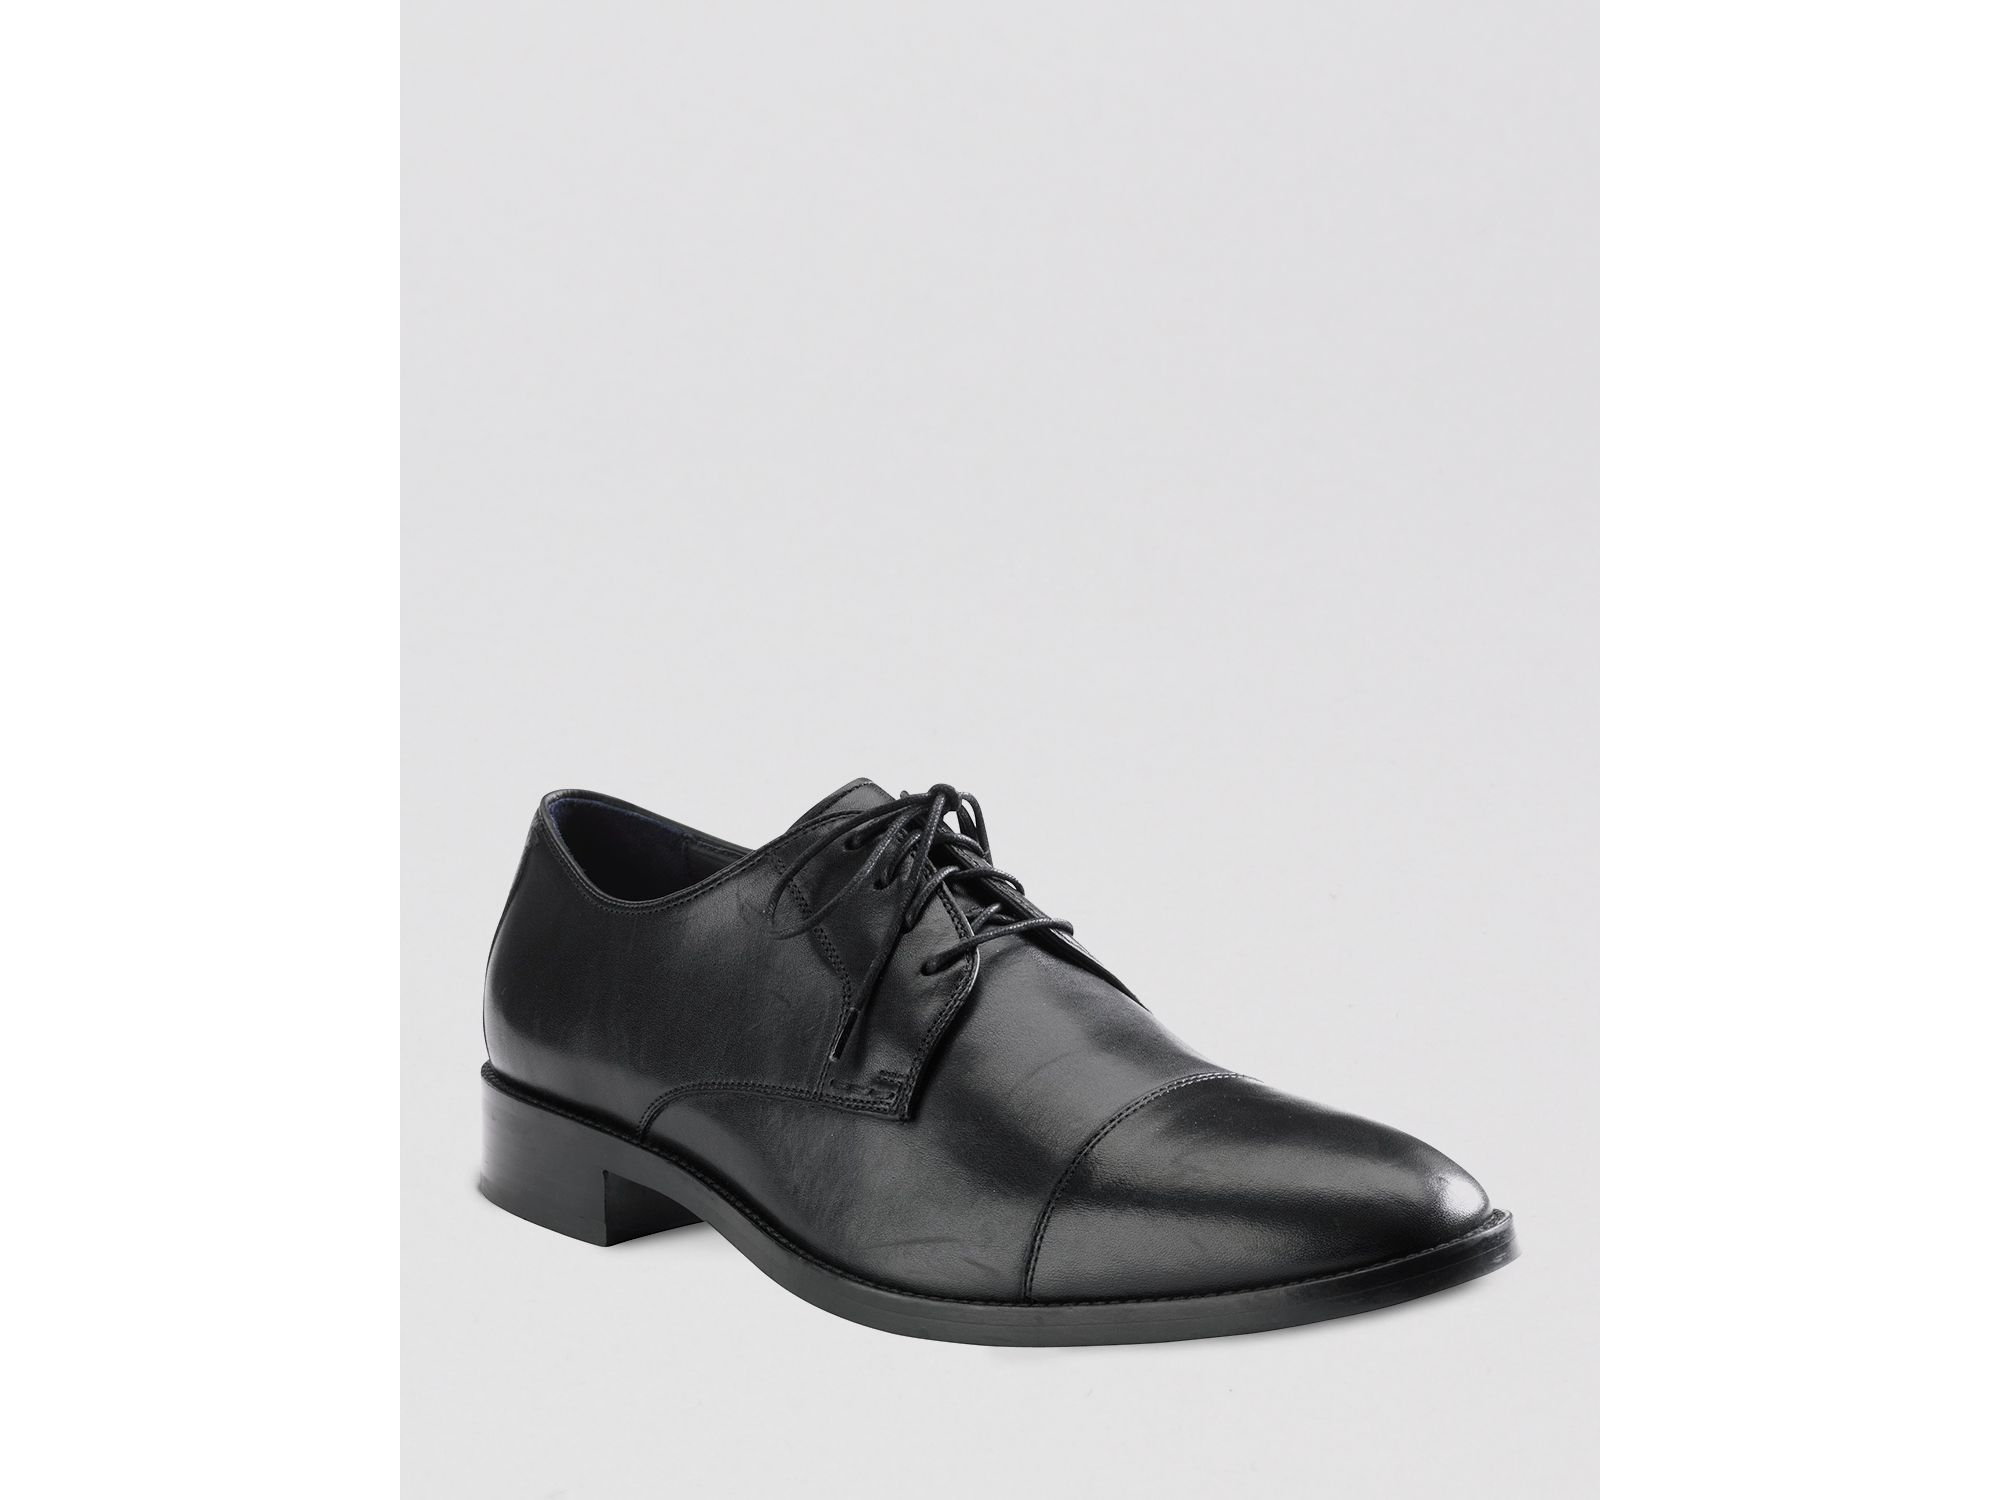 Lyst - Cole Haan Lenox Hill Leather Cap Toe Oxfords in Black for Men